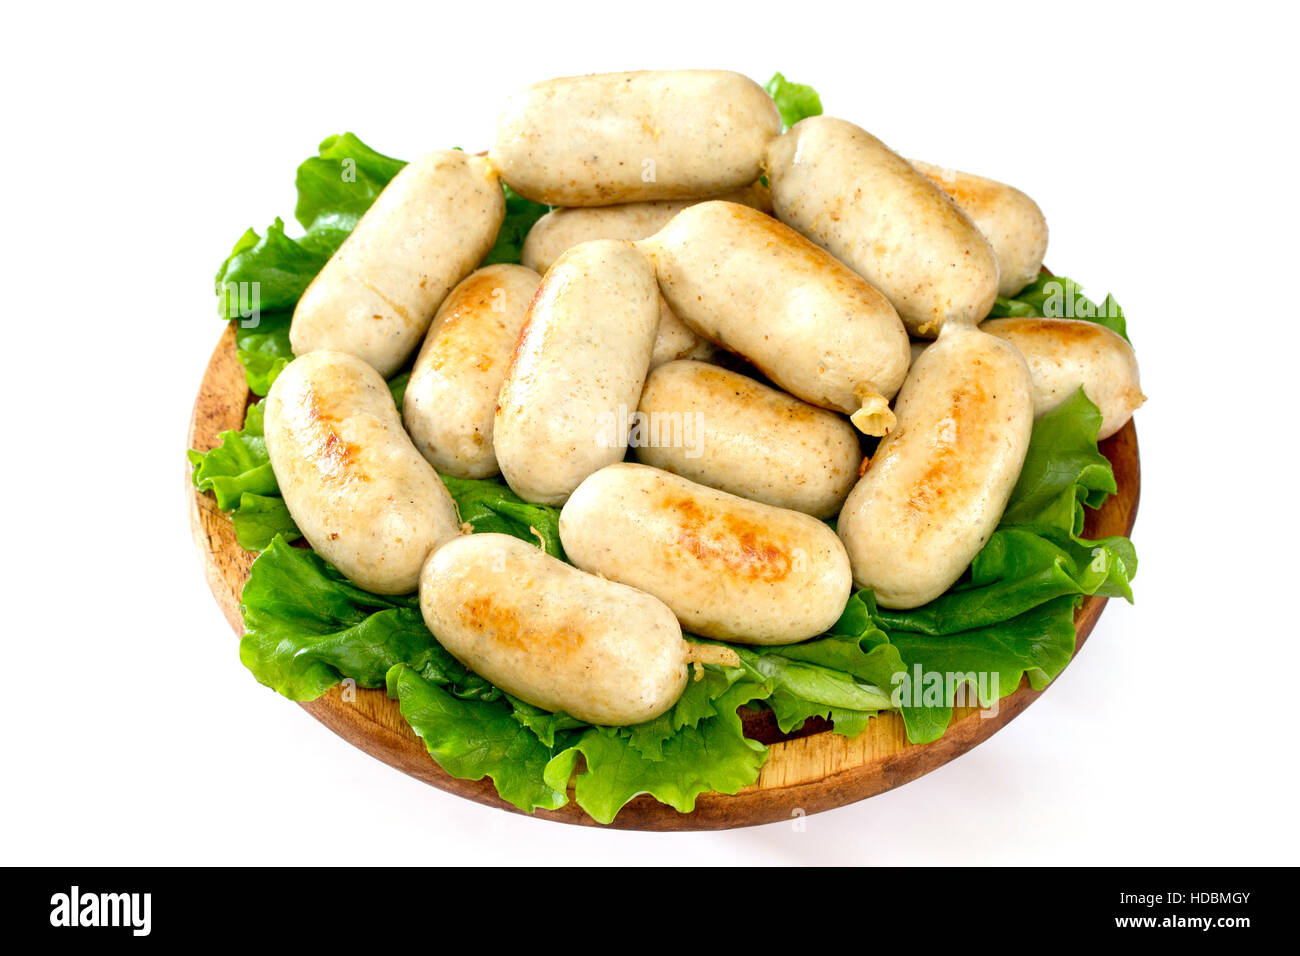 Homemade meat sausage on a wooden board Stock Photo